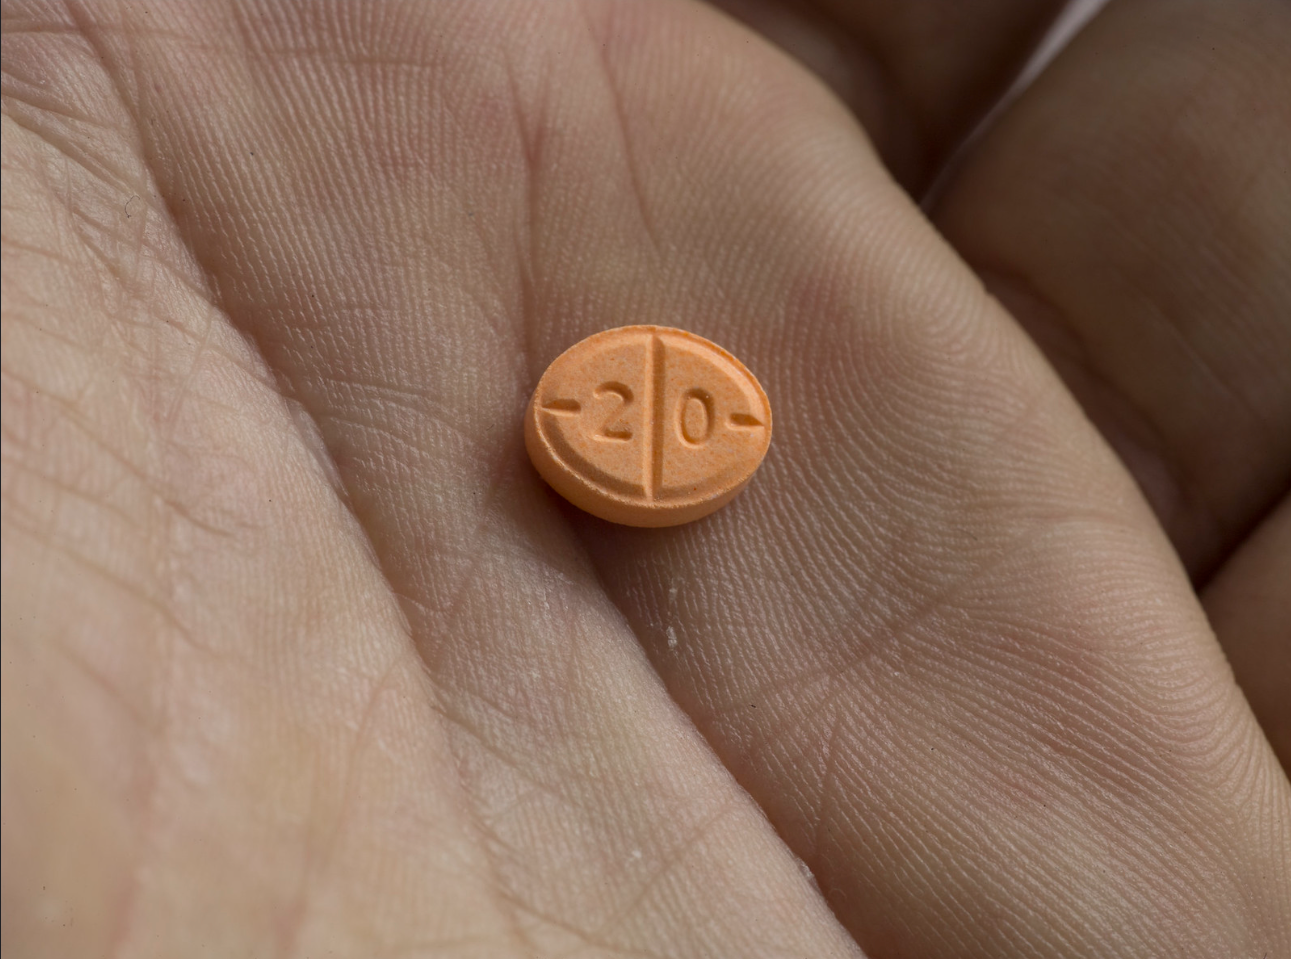 FDA issues orders on Adderall shortage